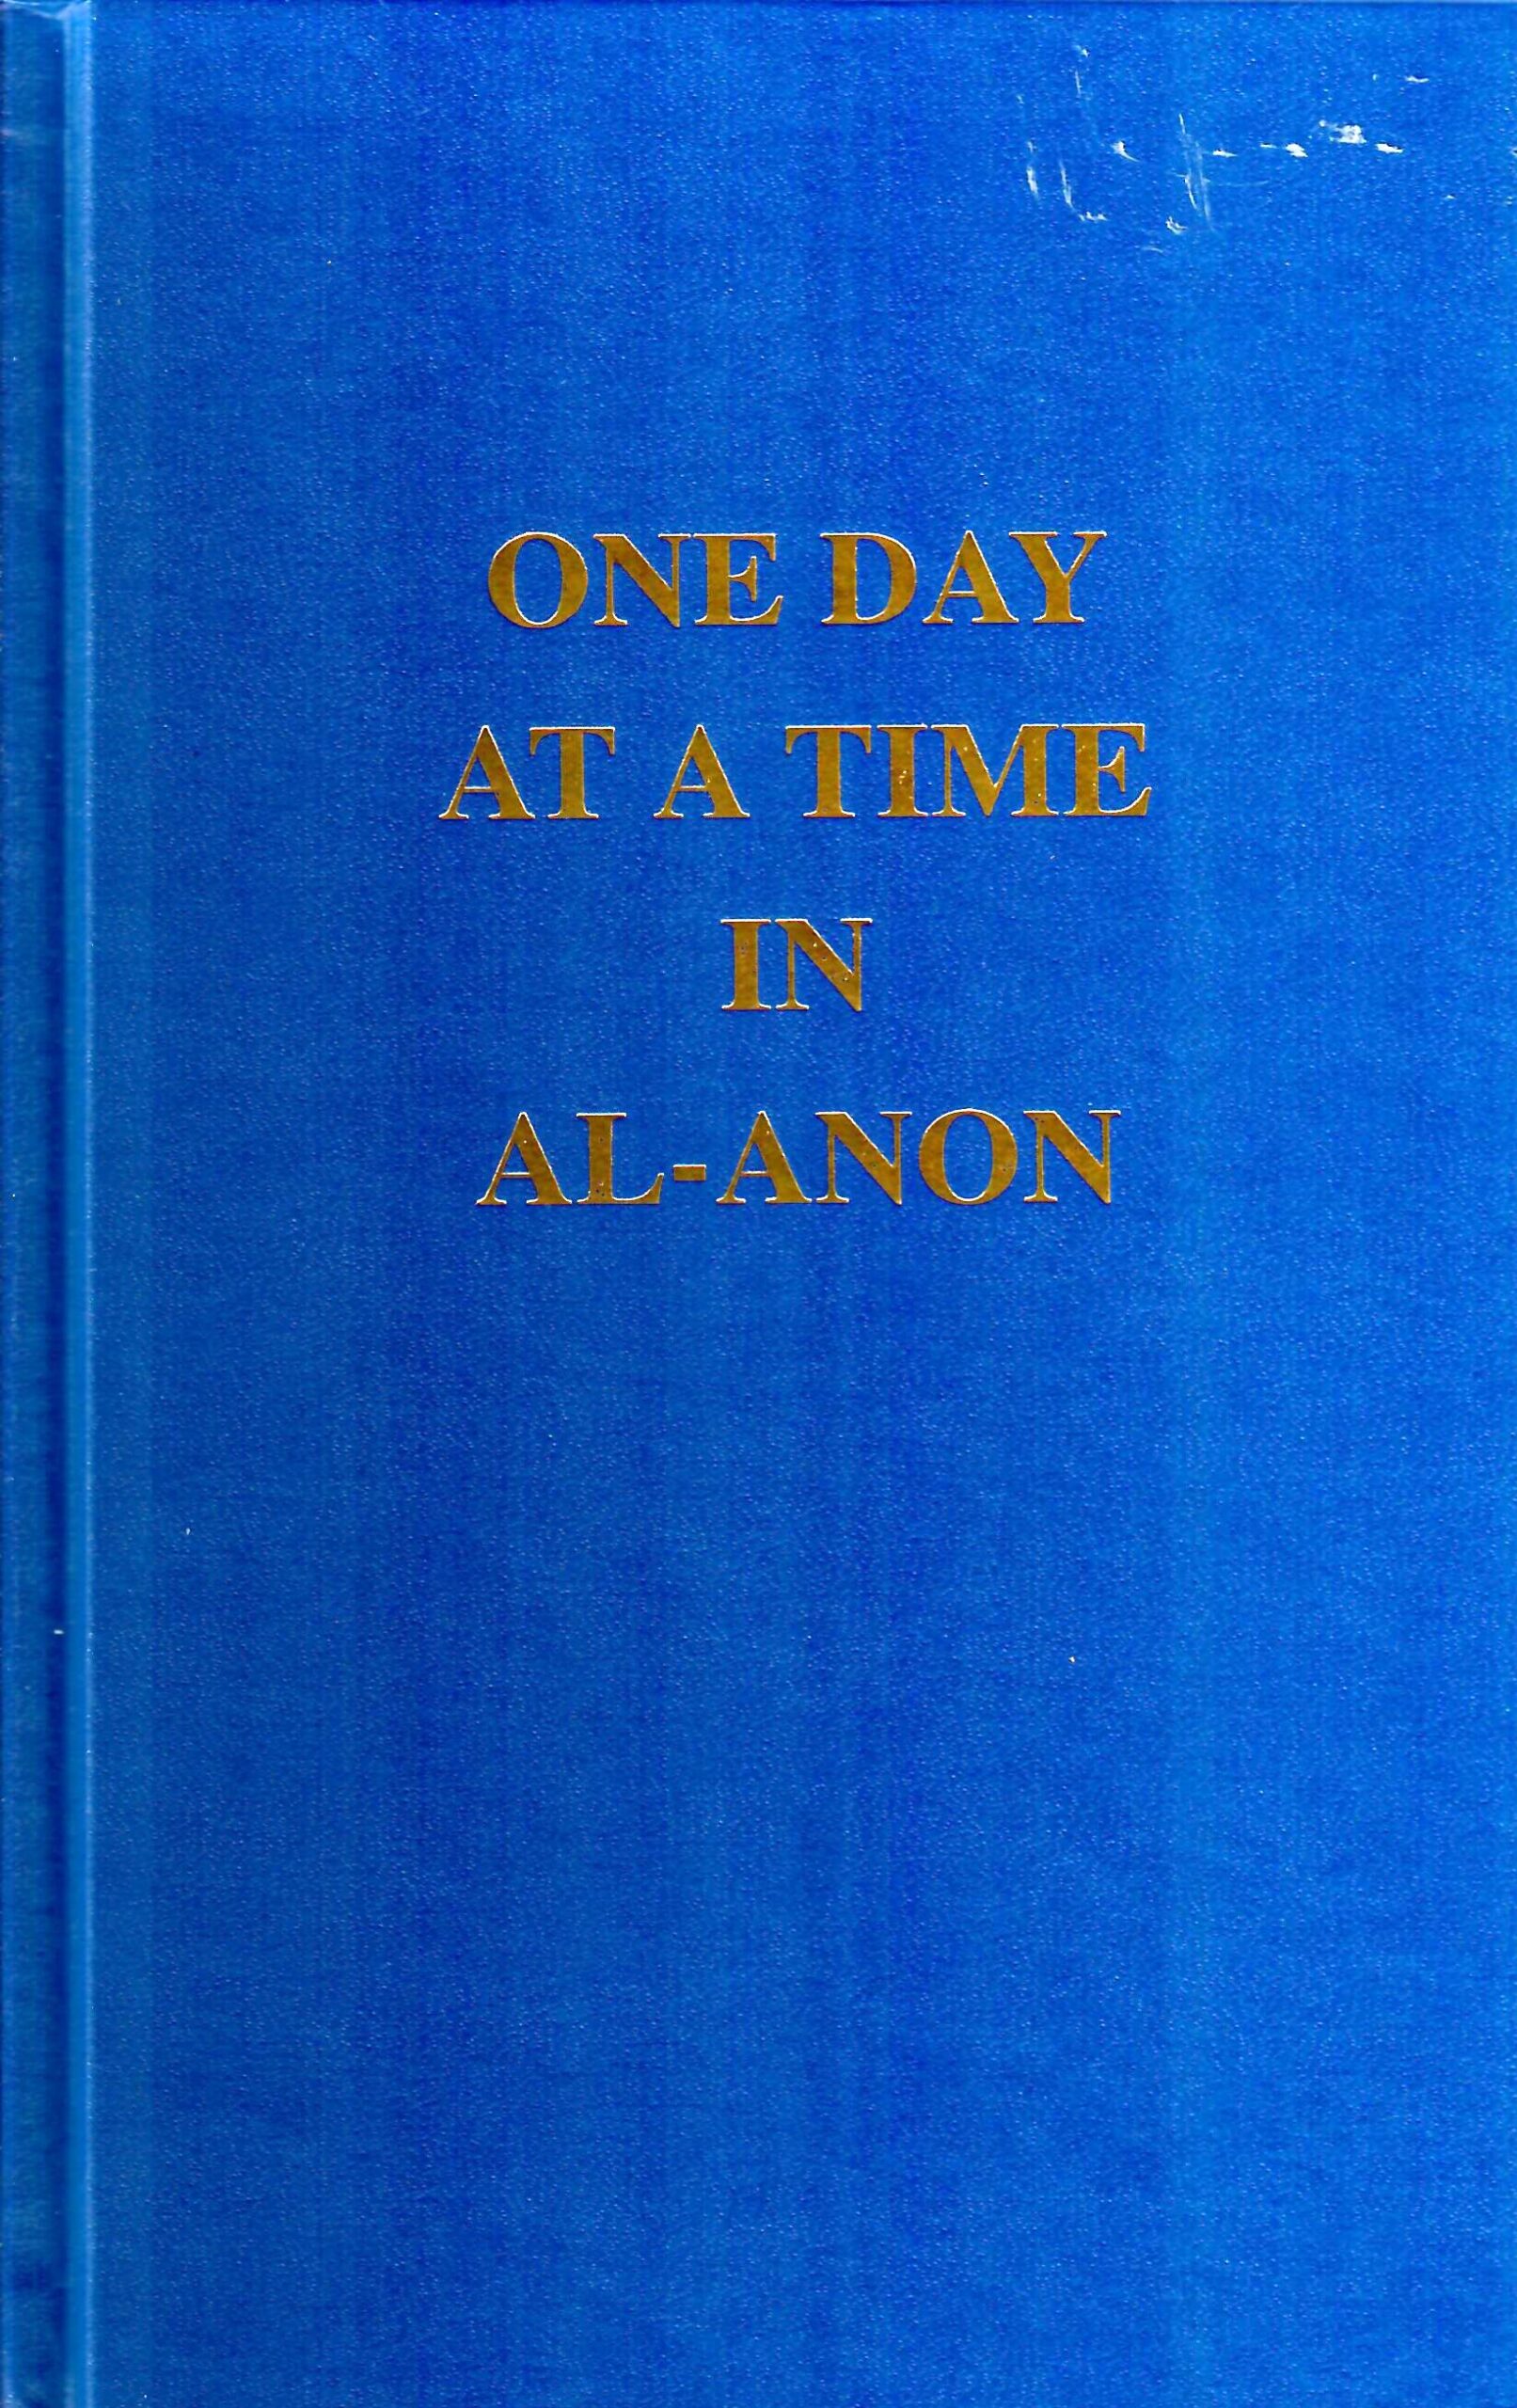 One Day at a Time in Al-Anon (Large Print) B-14